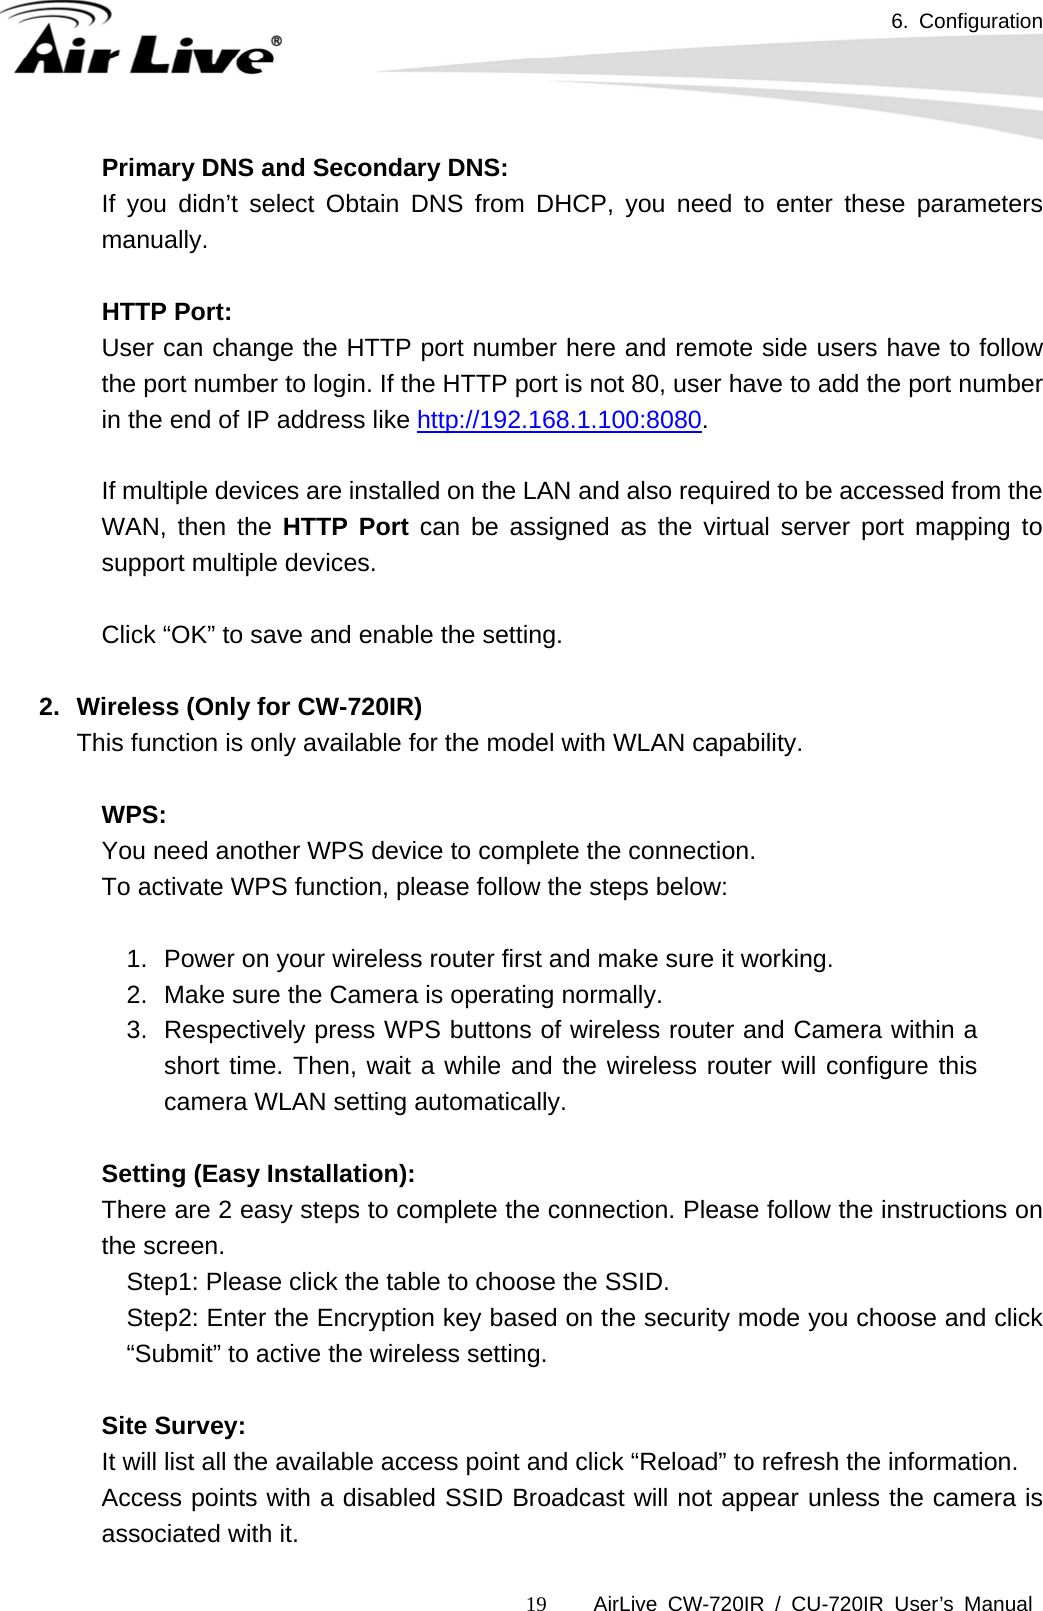 6. Configuration      AirLive CW-720IR / CU-720IR User’s Manual 19Primary DNS and Secondary DNS:  If you didn’t select Obtain DNS from DHCP, you need to enter these parameters manually.  HTTP Port: User can change the HTTP port number here and remote side users have to follow the port number to login. If the HTTP port is not 80, user have to add the port number in the end of IP address like http://192.168.1.100:8080.  If multiple devices are installed on the LAN and also required to be accessed from the WAN, then the HTTP Port can be assigned as the virtual server port mapping to support multiple devices.   Click “OK” to save and enable the setting.  2.  Wireless (Only for CW-720IR) This function is only available for the model with WLAN capability.  WPS:  You need another WPS device to complete the connection. To activate WPS function, please follow the steps below:  1.  Power on your wireless router first and make sure it working. 2.  Make sure the Camera is operating normally. 3.  Respectively press WPS buttons of wireless router and Camera within a short time. Then, wait a while and the wireless router will configure this camera WLAN setting automatically.  Setting (Easy Installation):  There are 2 easy steps to complete the connection. Please follow the instructions on the screen. Step1: Please click the table to choose the SSID. Step2: Enter the Encryption key based on the security mode you choose and click “Submit” to active the wireless setting.    Site Survey:  It will list all the available access point and click “Reload” to refresh the information. Access points with a disabled SSID Broadcast will not appear unless the camera is associated with it. 